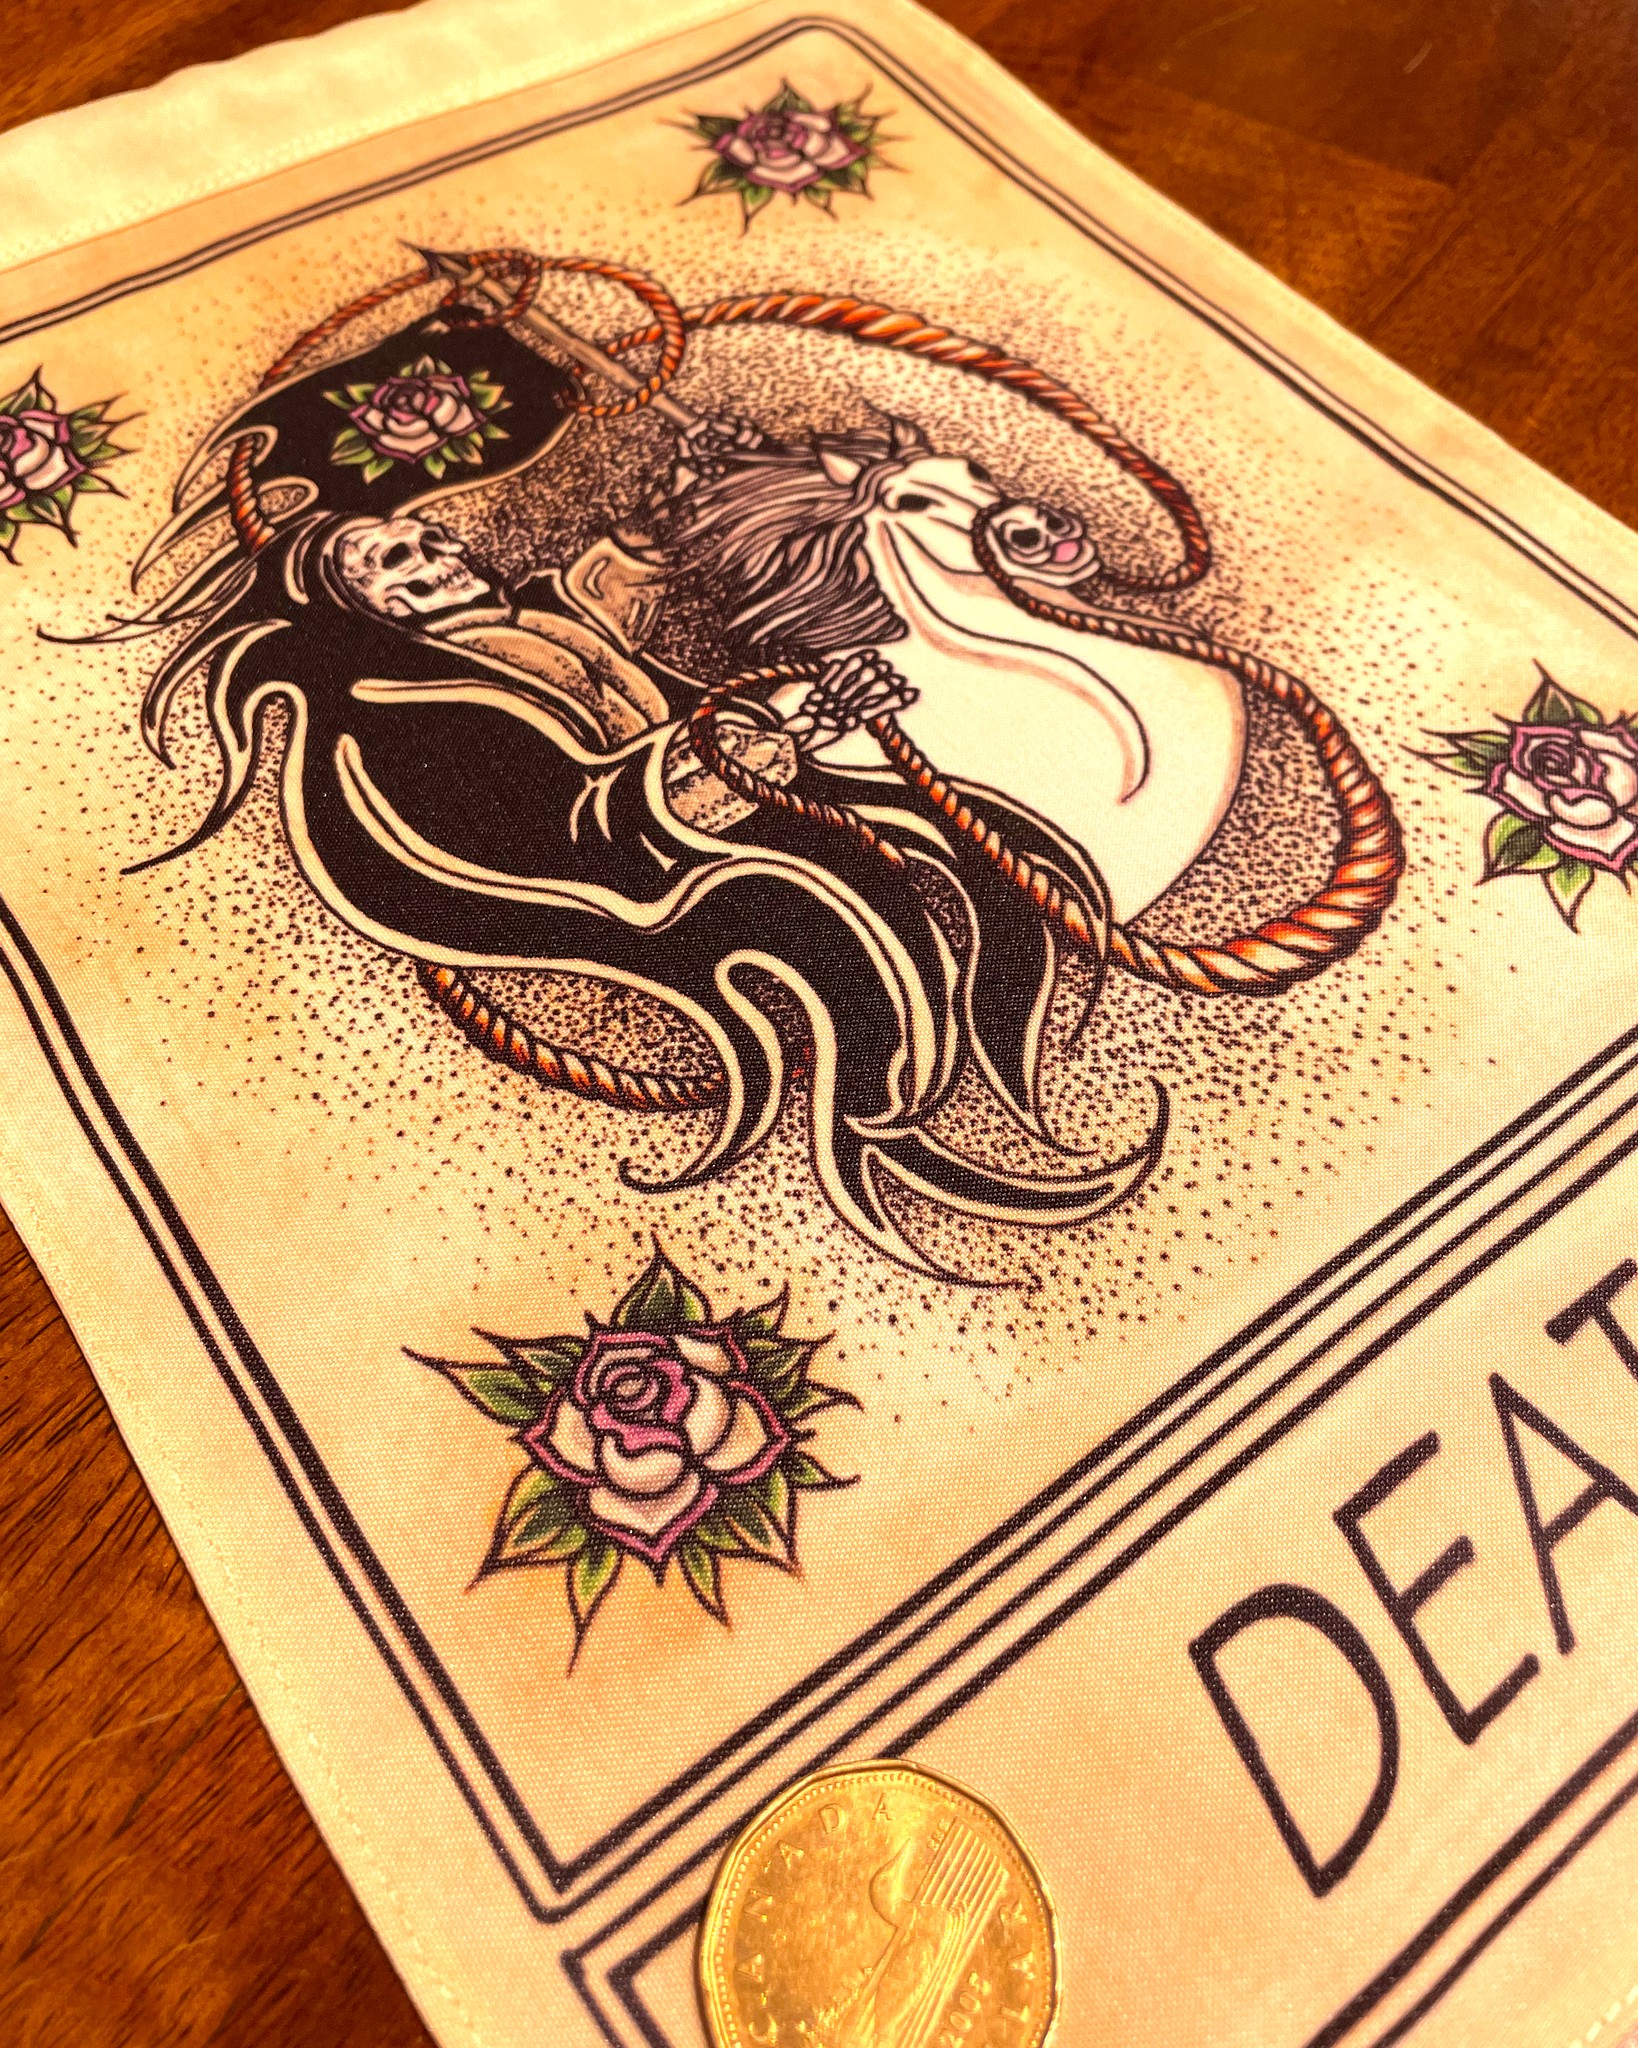 Death Card - Tapestry (7.75X11")